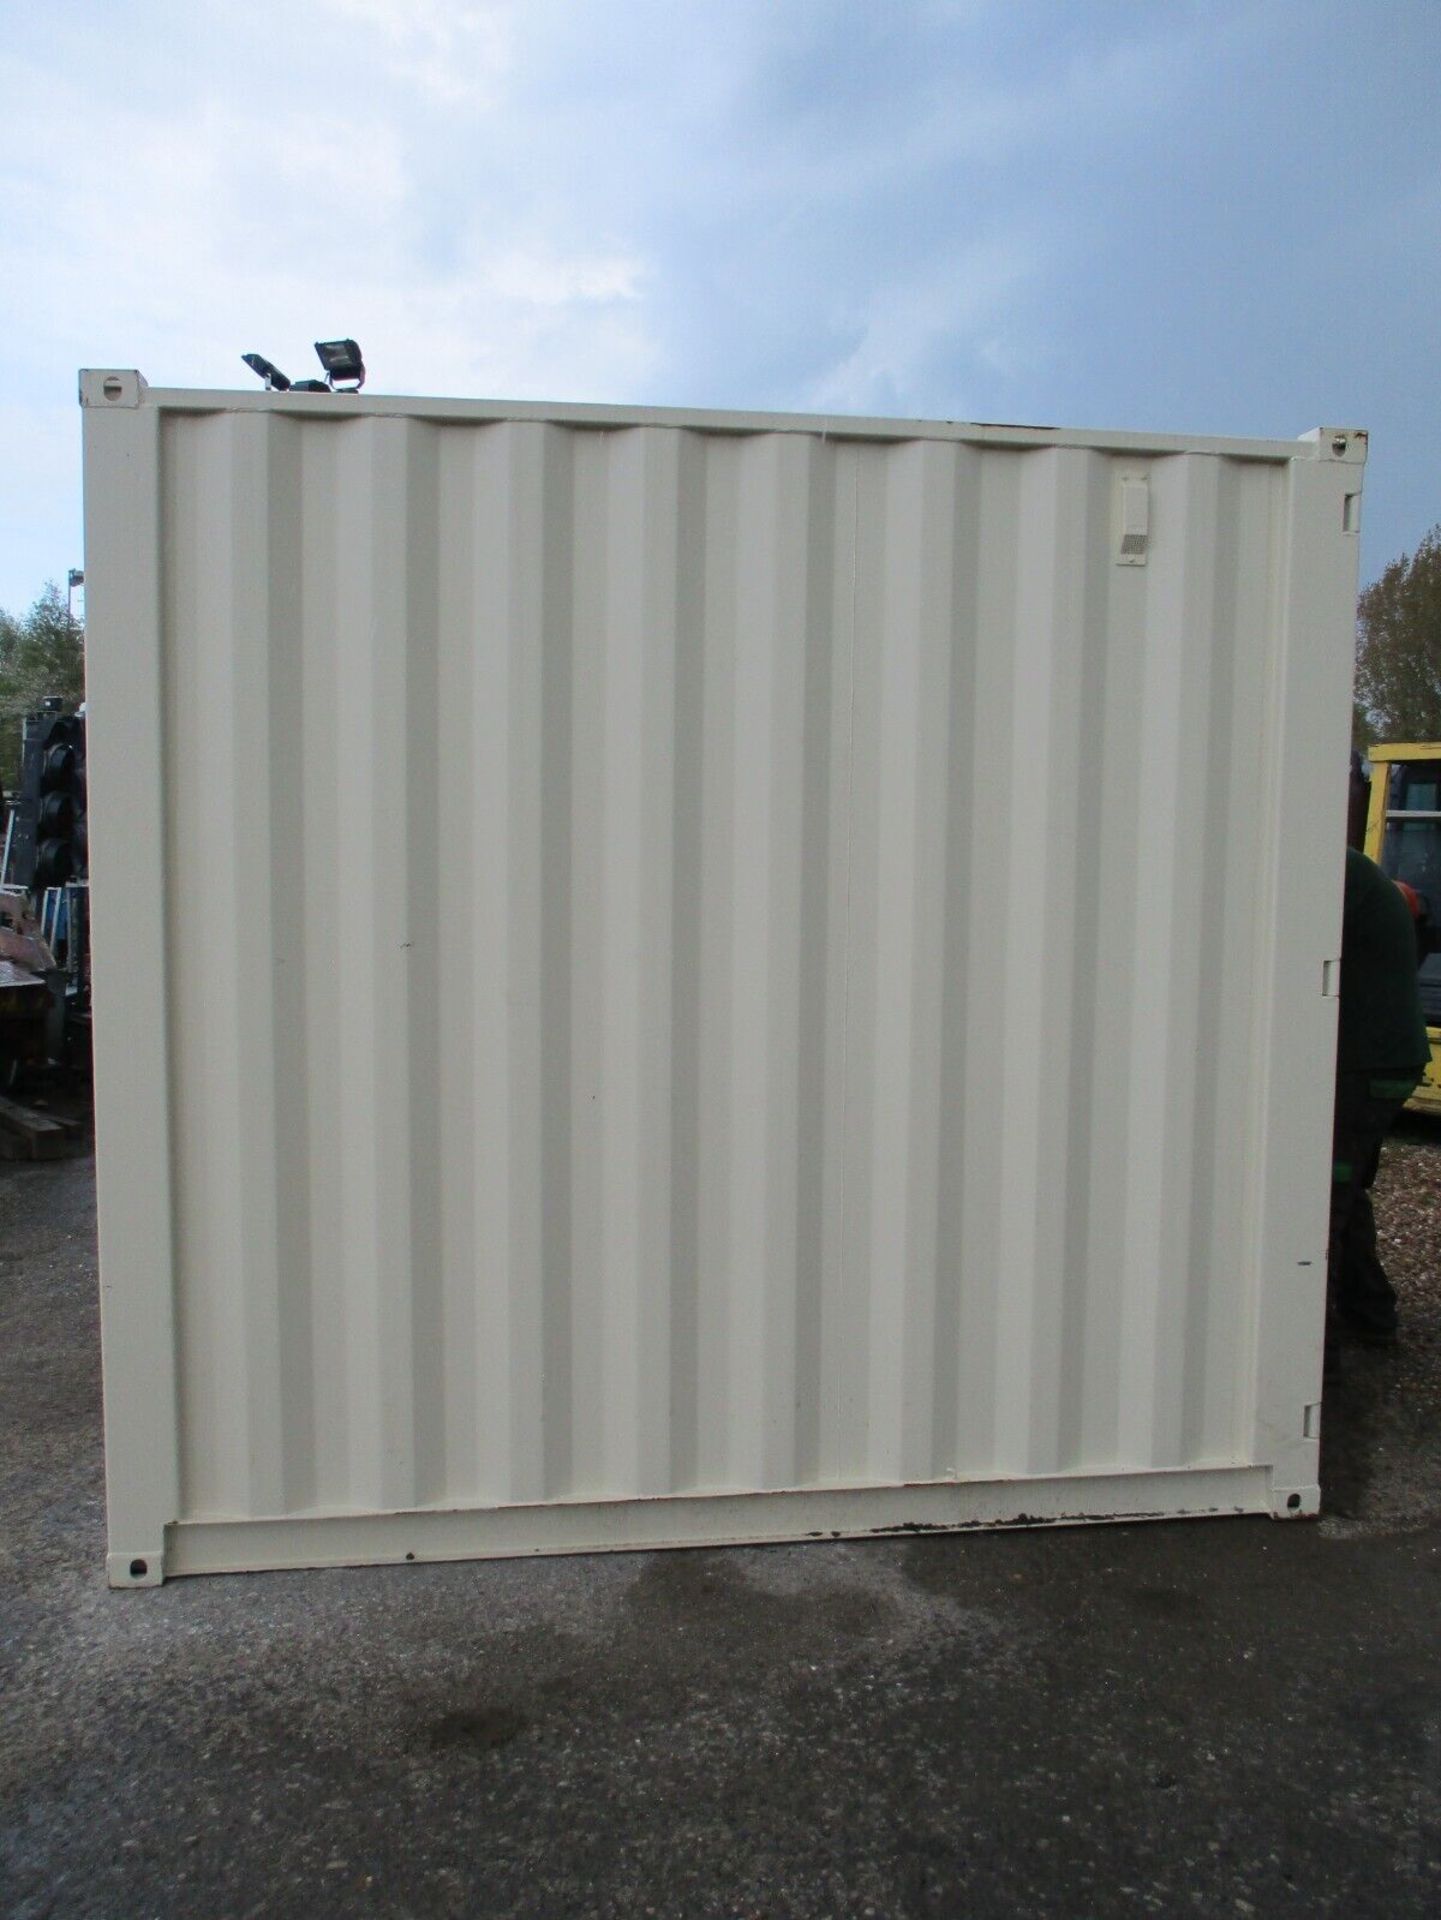 NEW 9 FOOT SECURE SHIPPING CONTAINER 10 HOME OFFICE GARDEN ROOM GARAGE SHED - Image 5 of 7